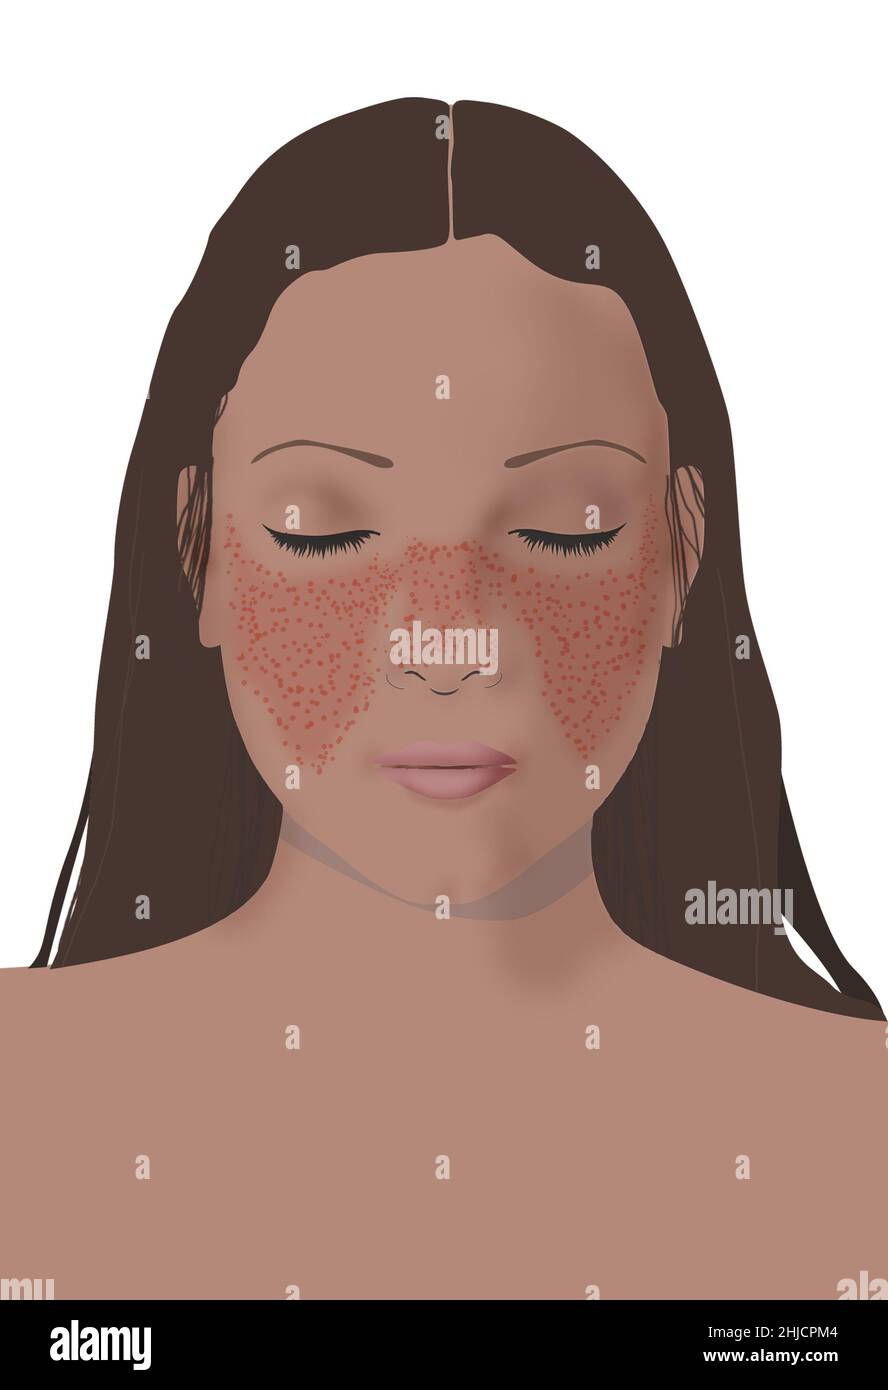 Systemic lupus erythematosus is a chronic inflammatory condition. Symptoms may only be the skin rash, but other symptoms may occur such as joint pain.  It is an autoimmune disease when the body's tissues are attacked by its own immune system. Patients with lupus have antibodies in their blood that are targeted against their own body tissues. Stock Photo